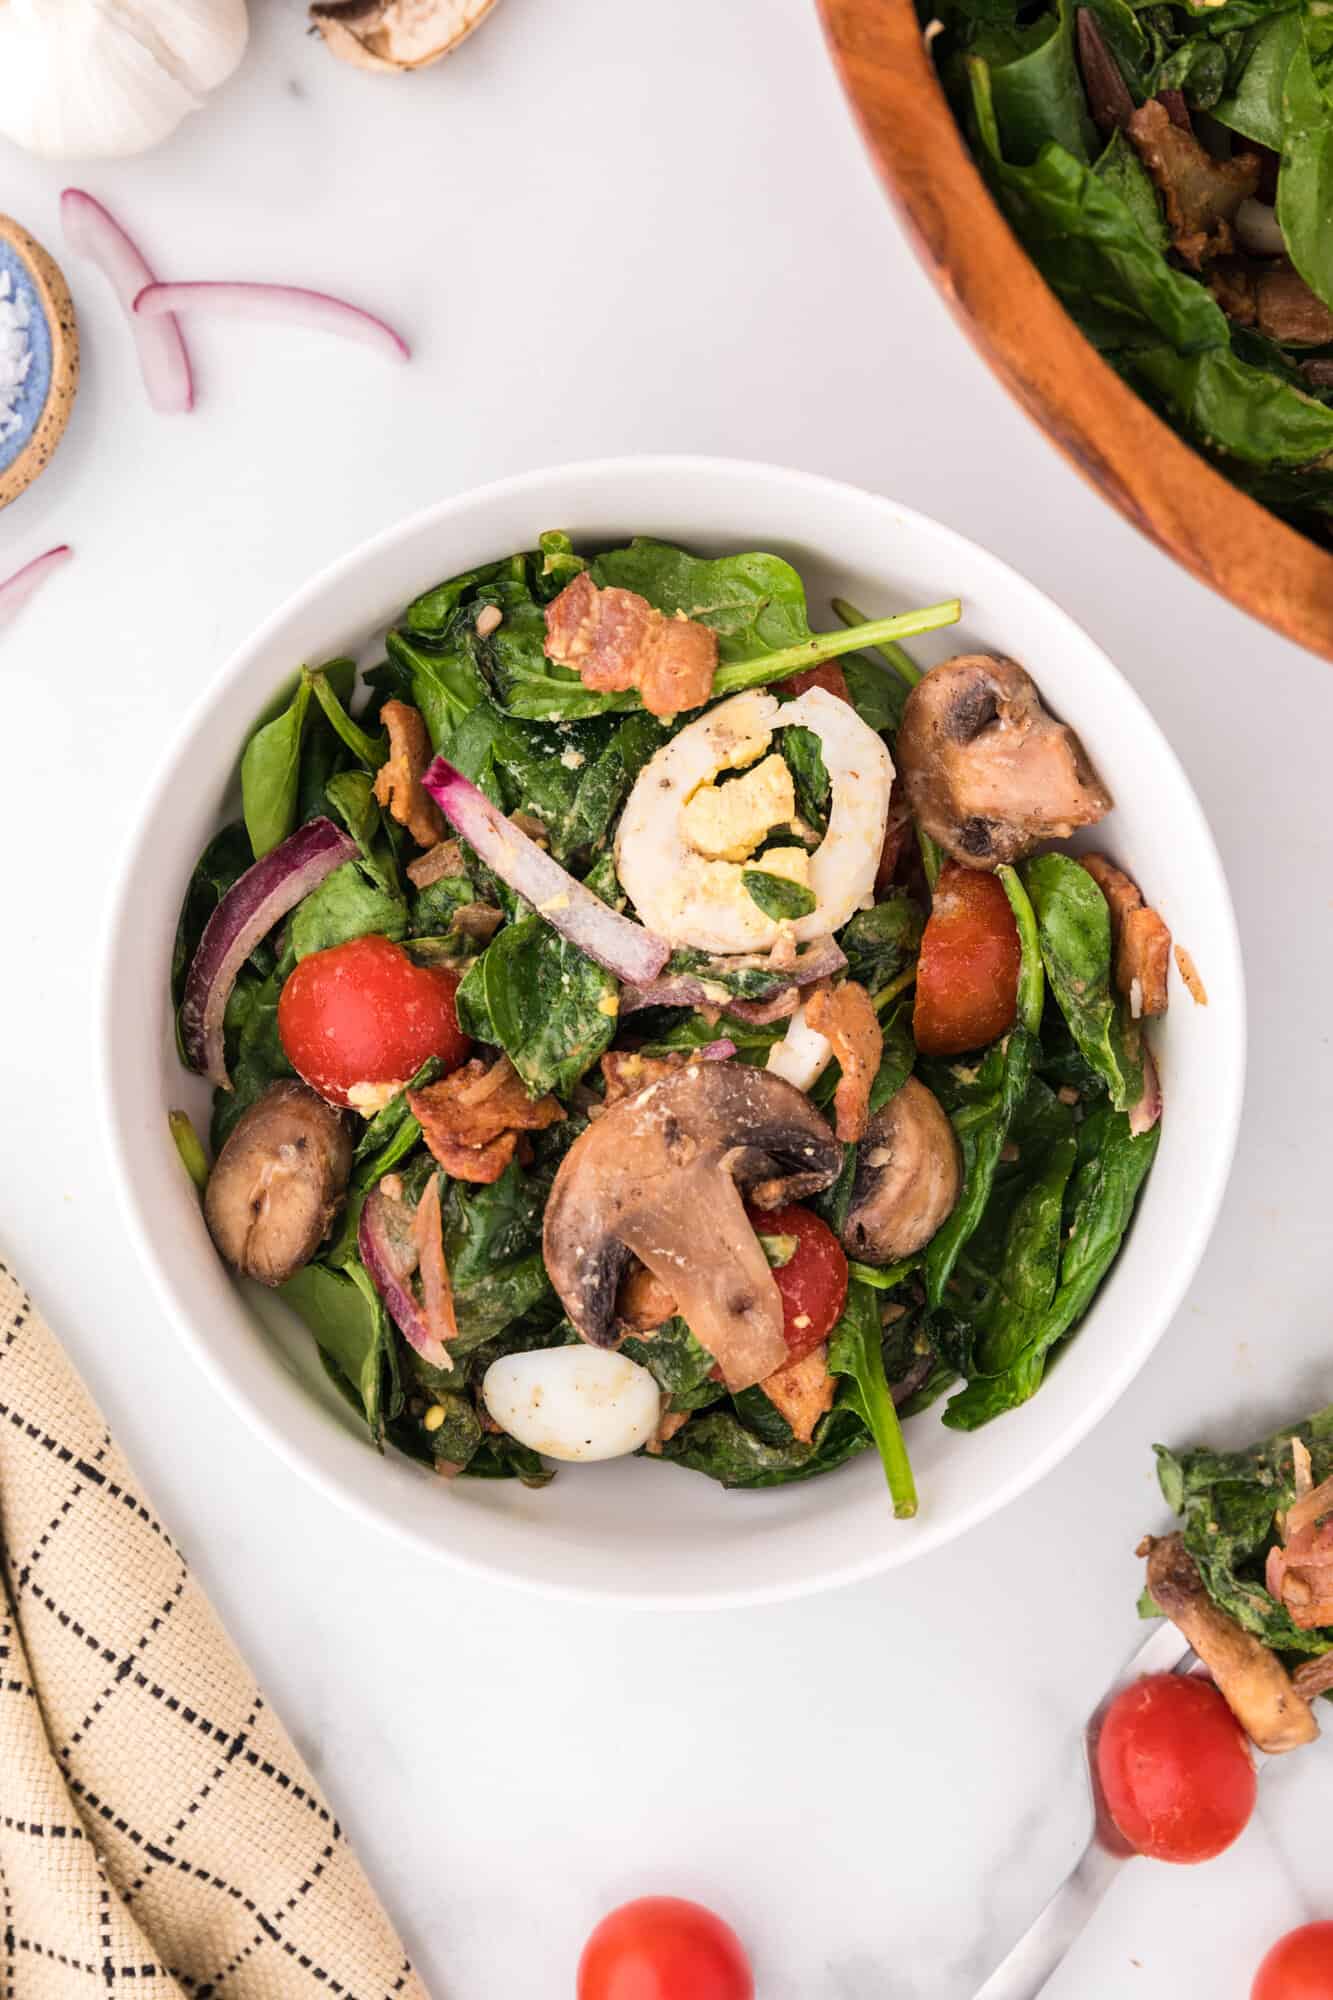 Spinach salad in a small bowl, surrounded by ingredients.